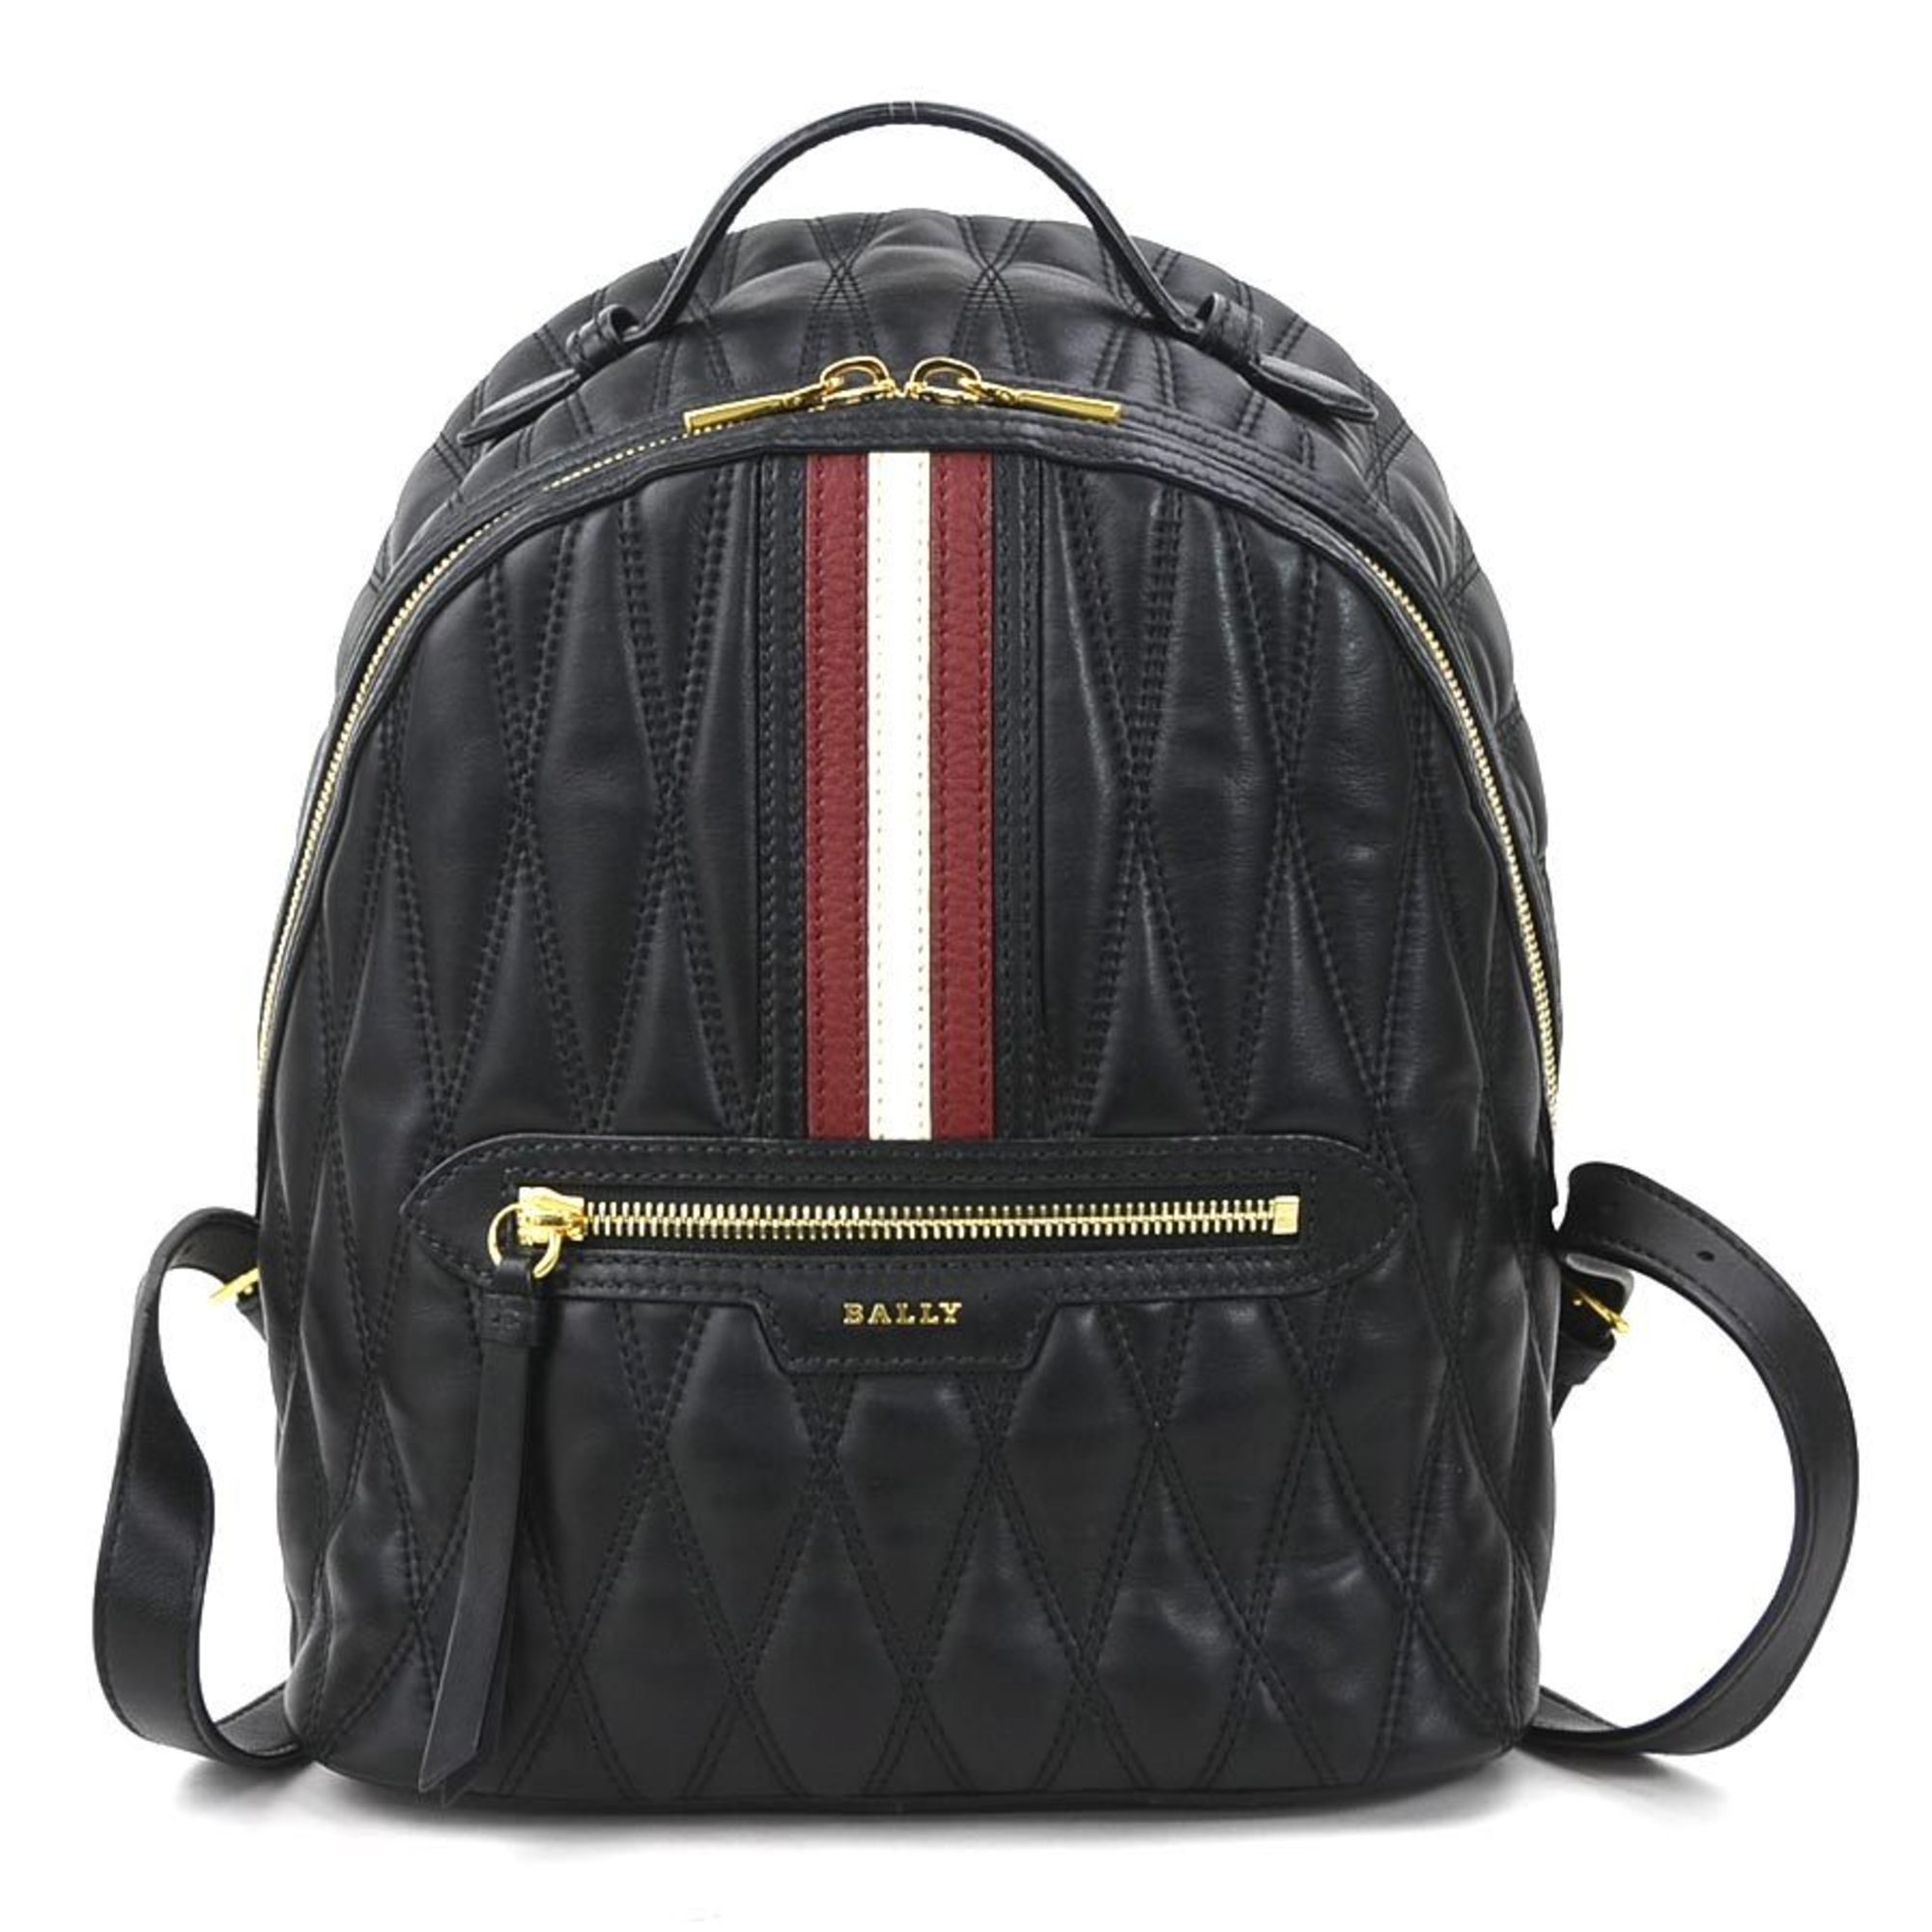 BALLY Backpack Leather Black Women's h30338f